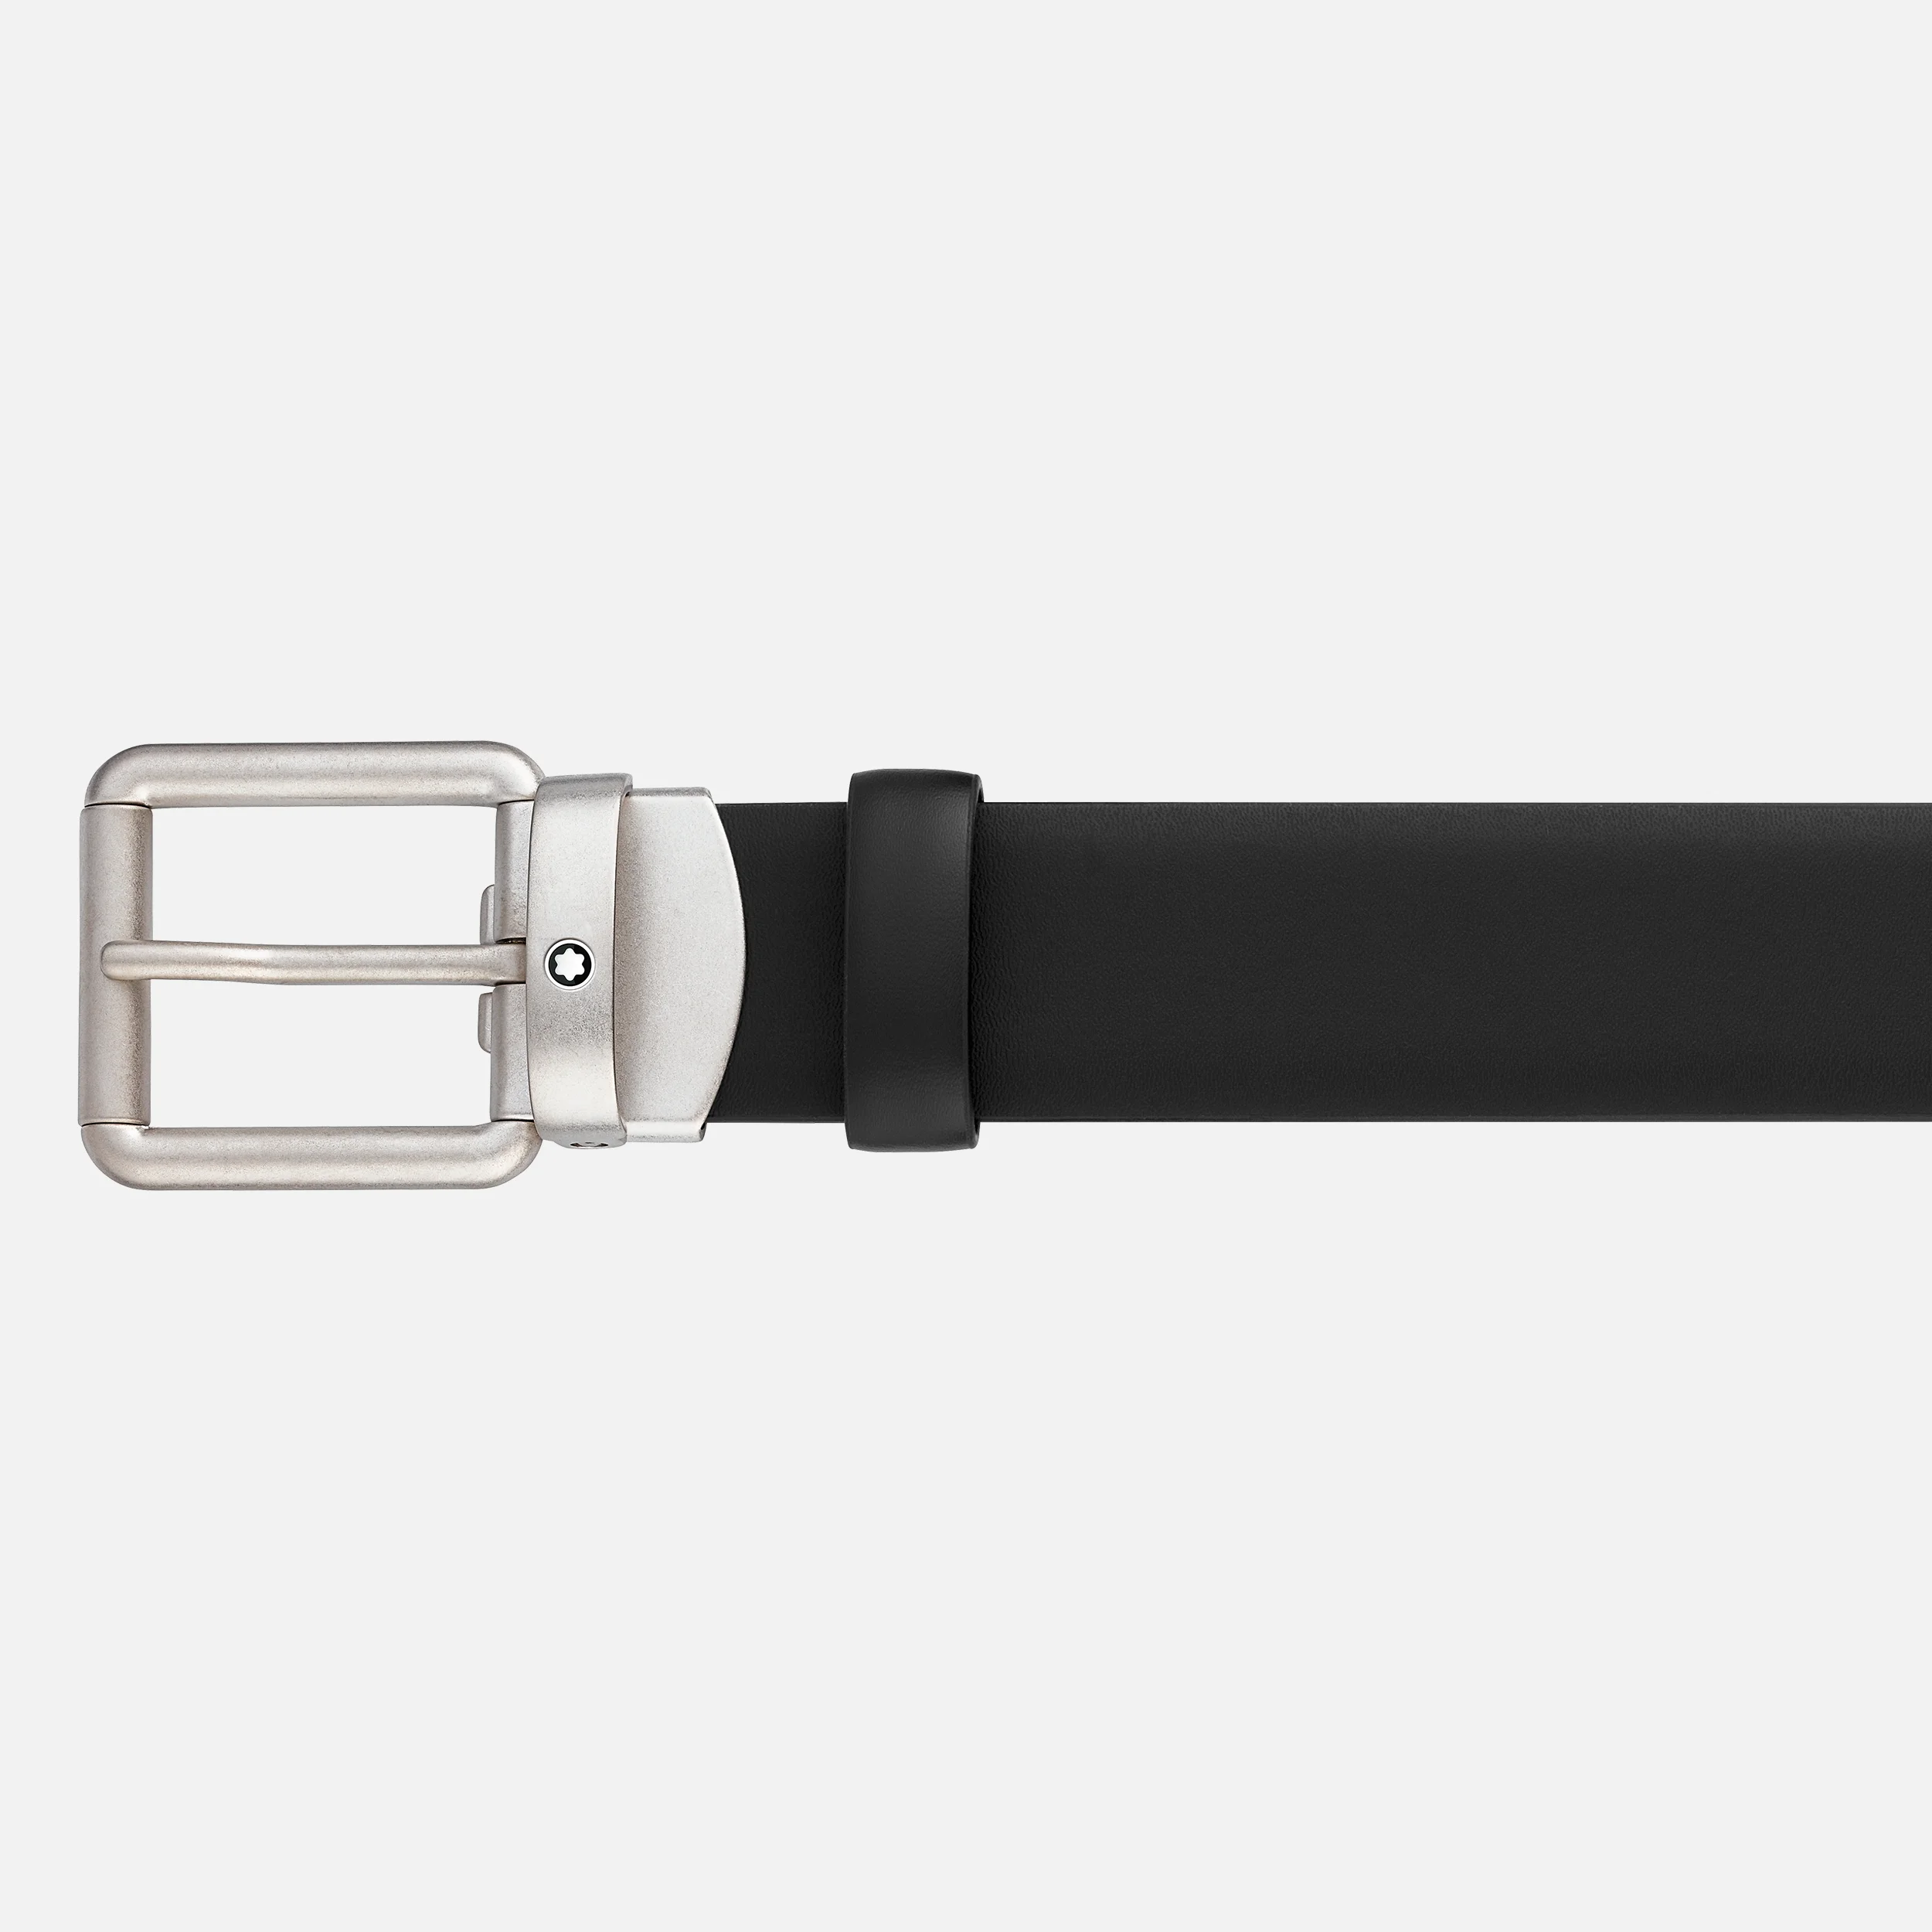 Montblanc Belt Rounded Square Vintage Stainless Steel Buckle Matte Leather Black 30mm - Pencraft the boutique